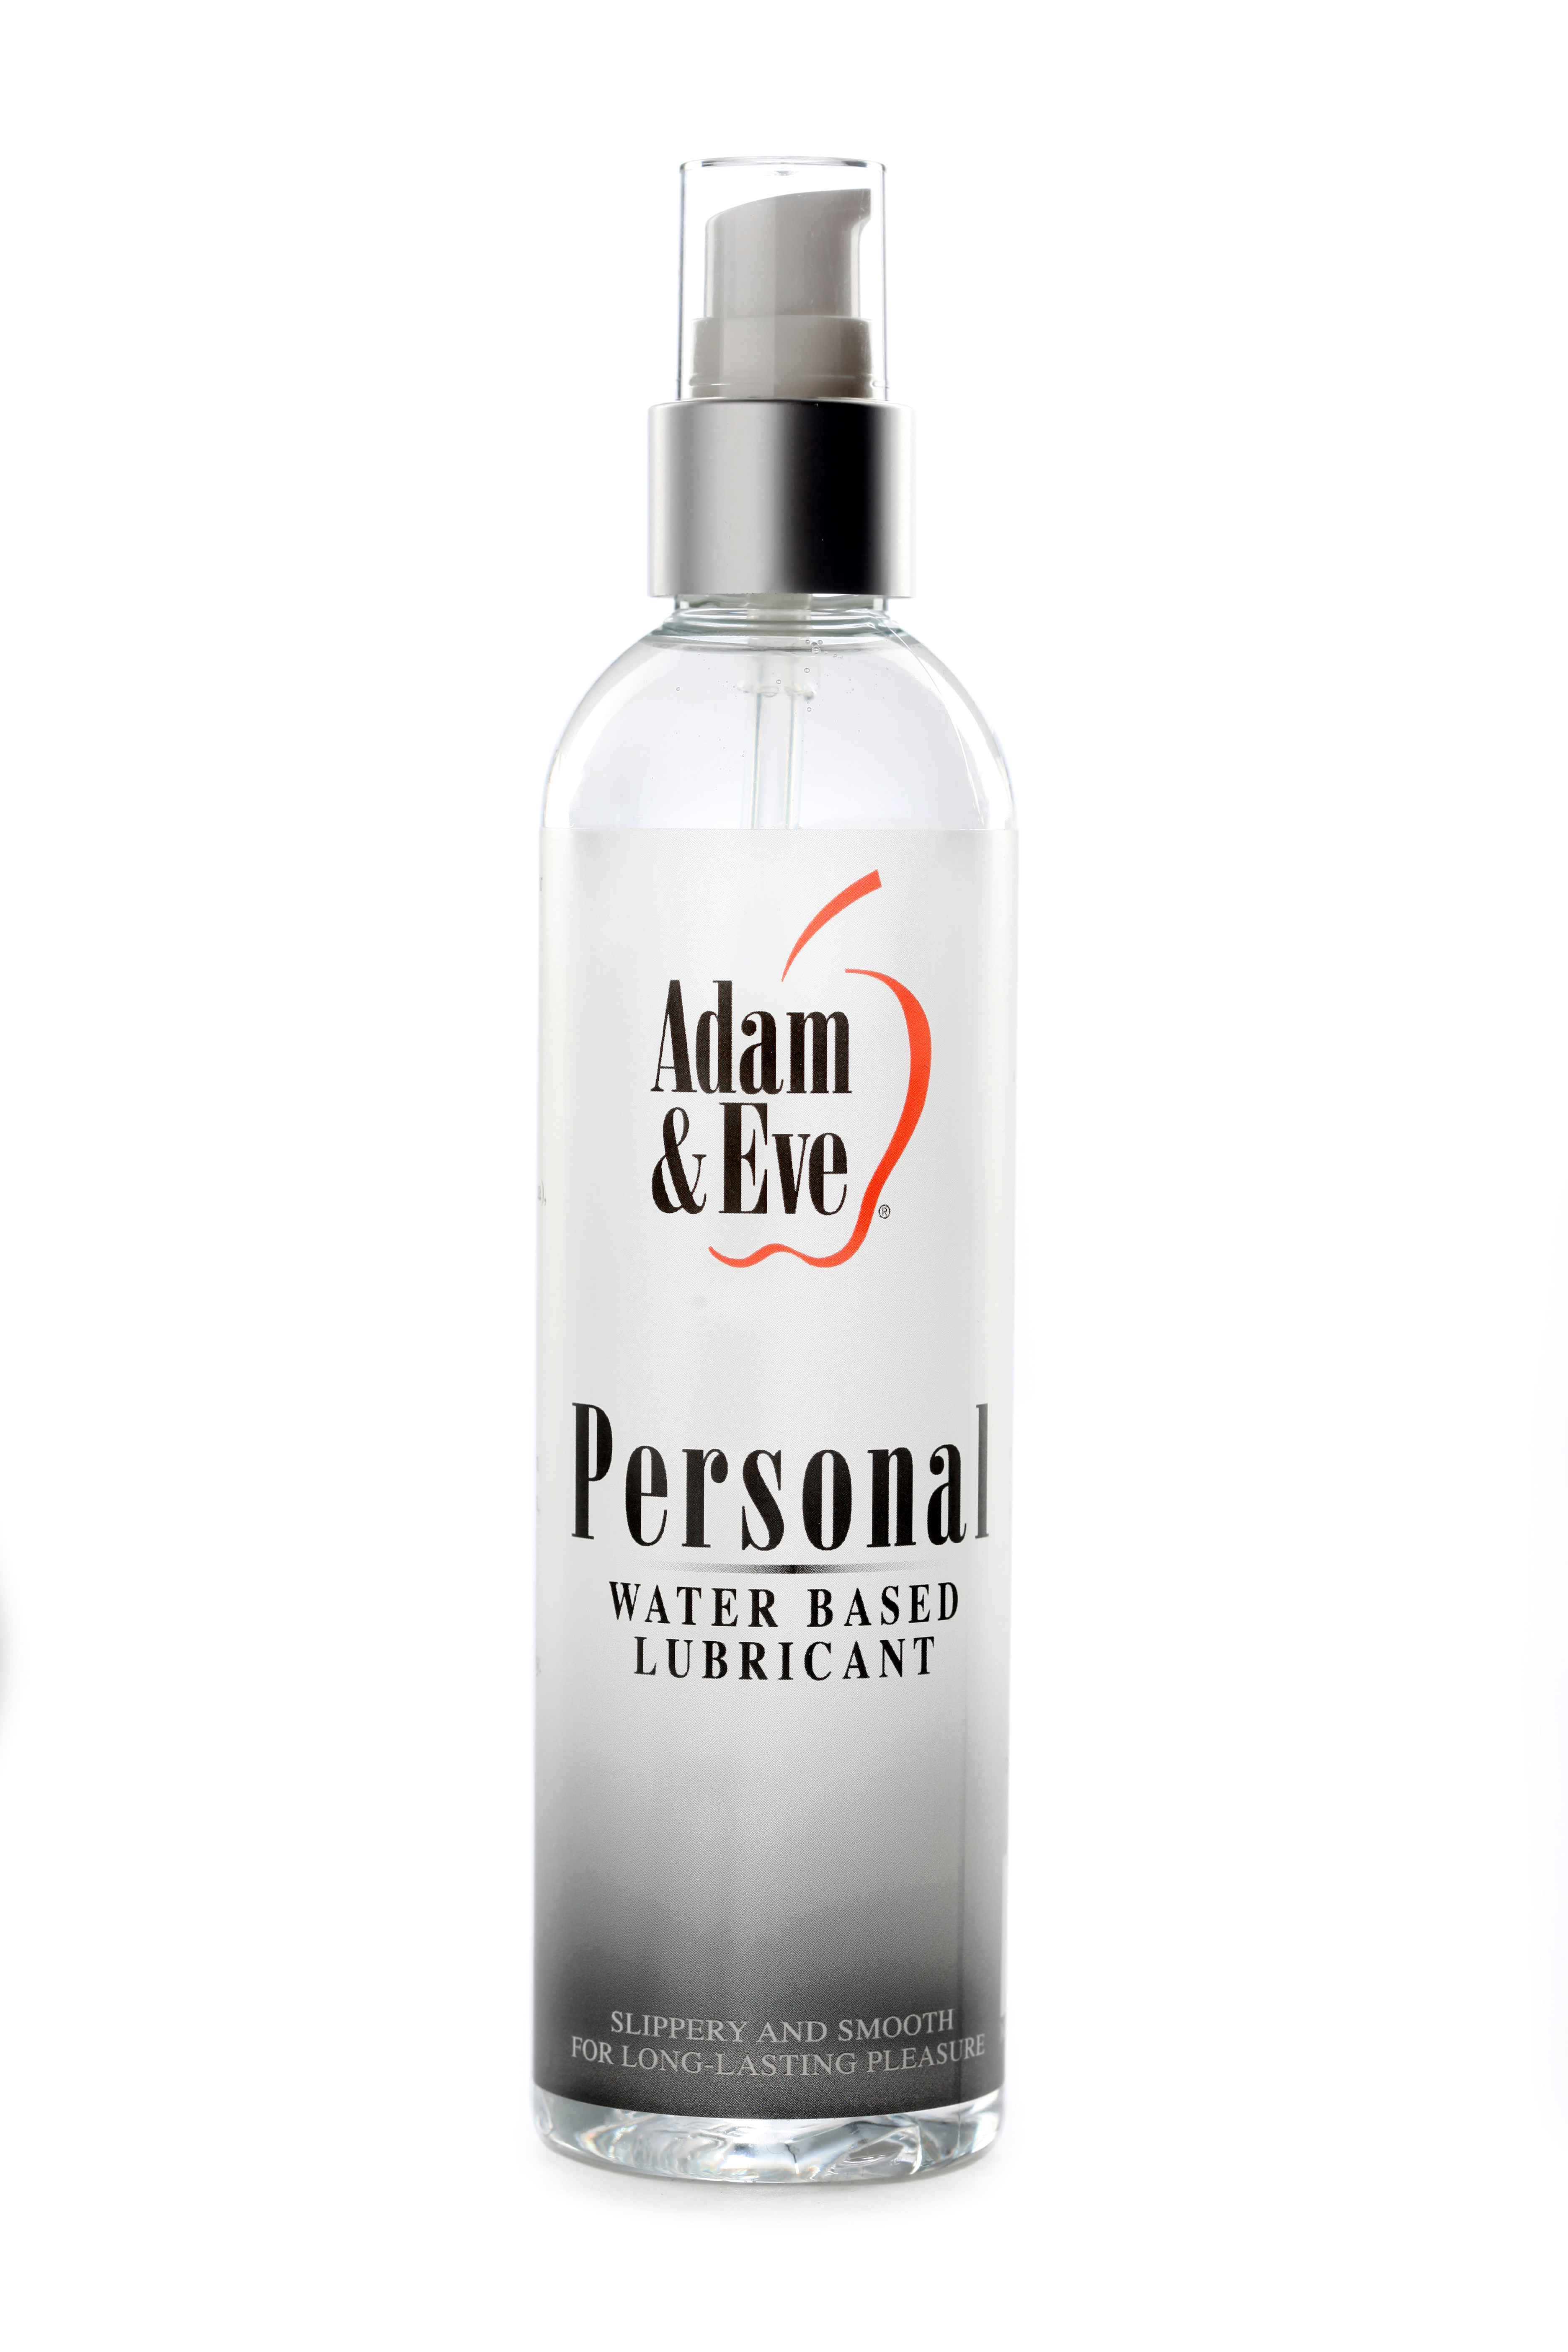 ADAM & EVE PERSONAL WATER BASED LUBE 8 OZ  